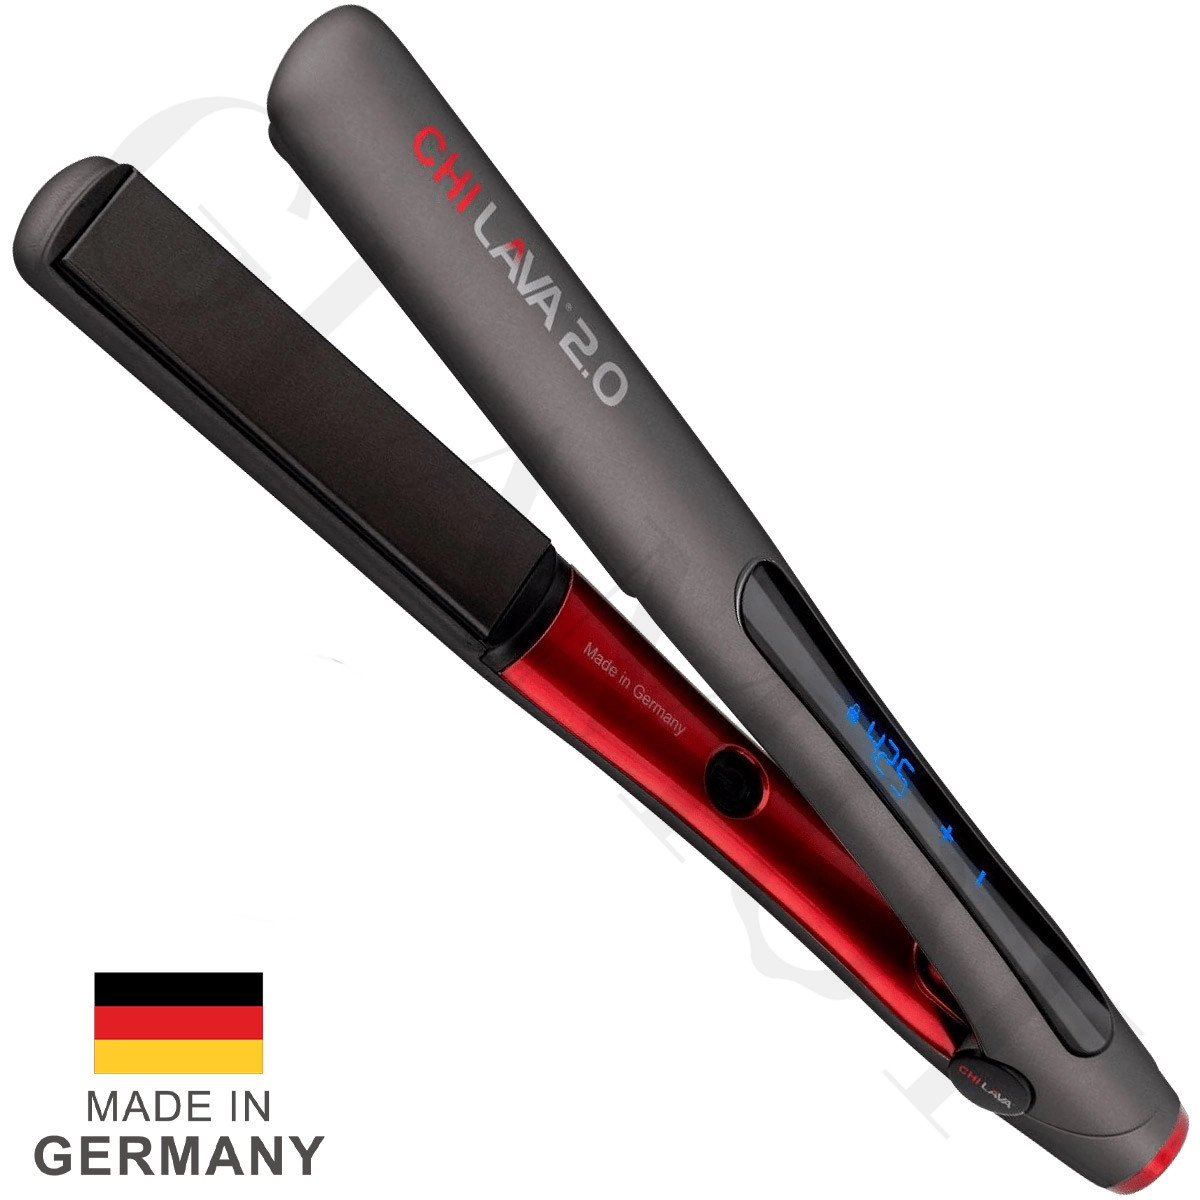 CHI Air Style Series Tourmaline Ceramic Hairstyling Iron 1 Inch | Free US  Shipping | lookfantastic